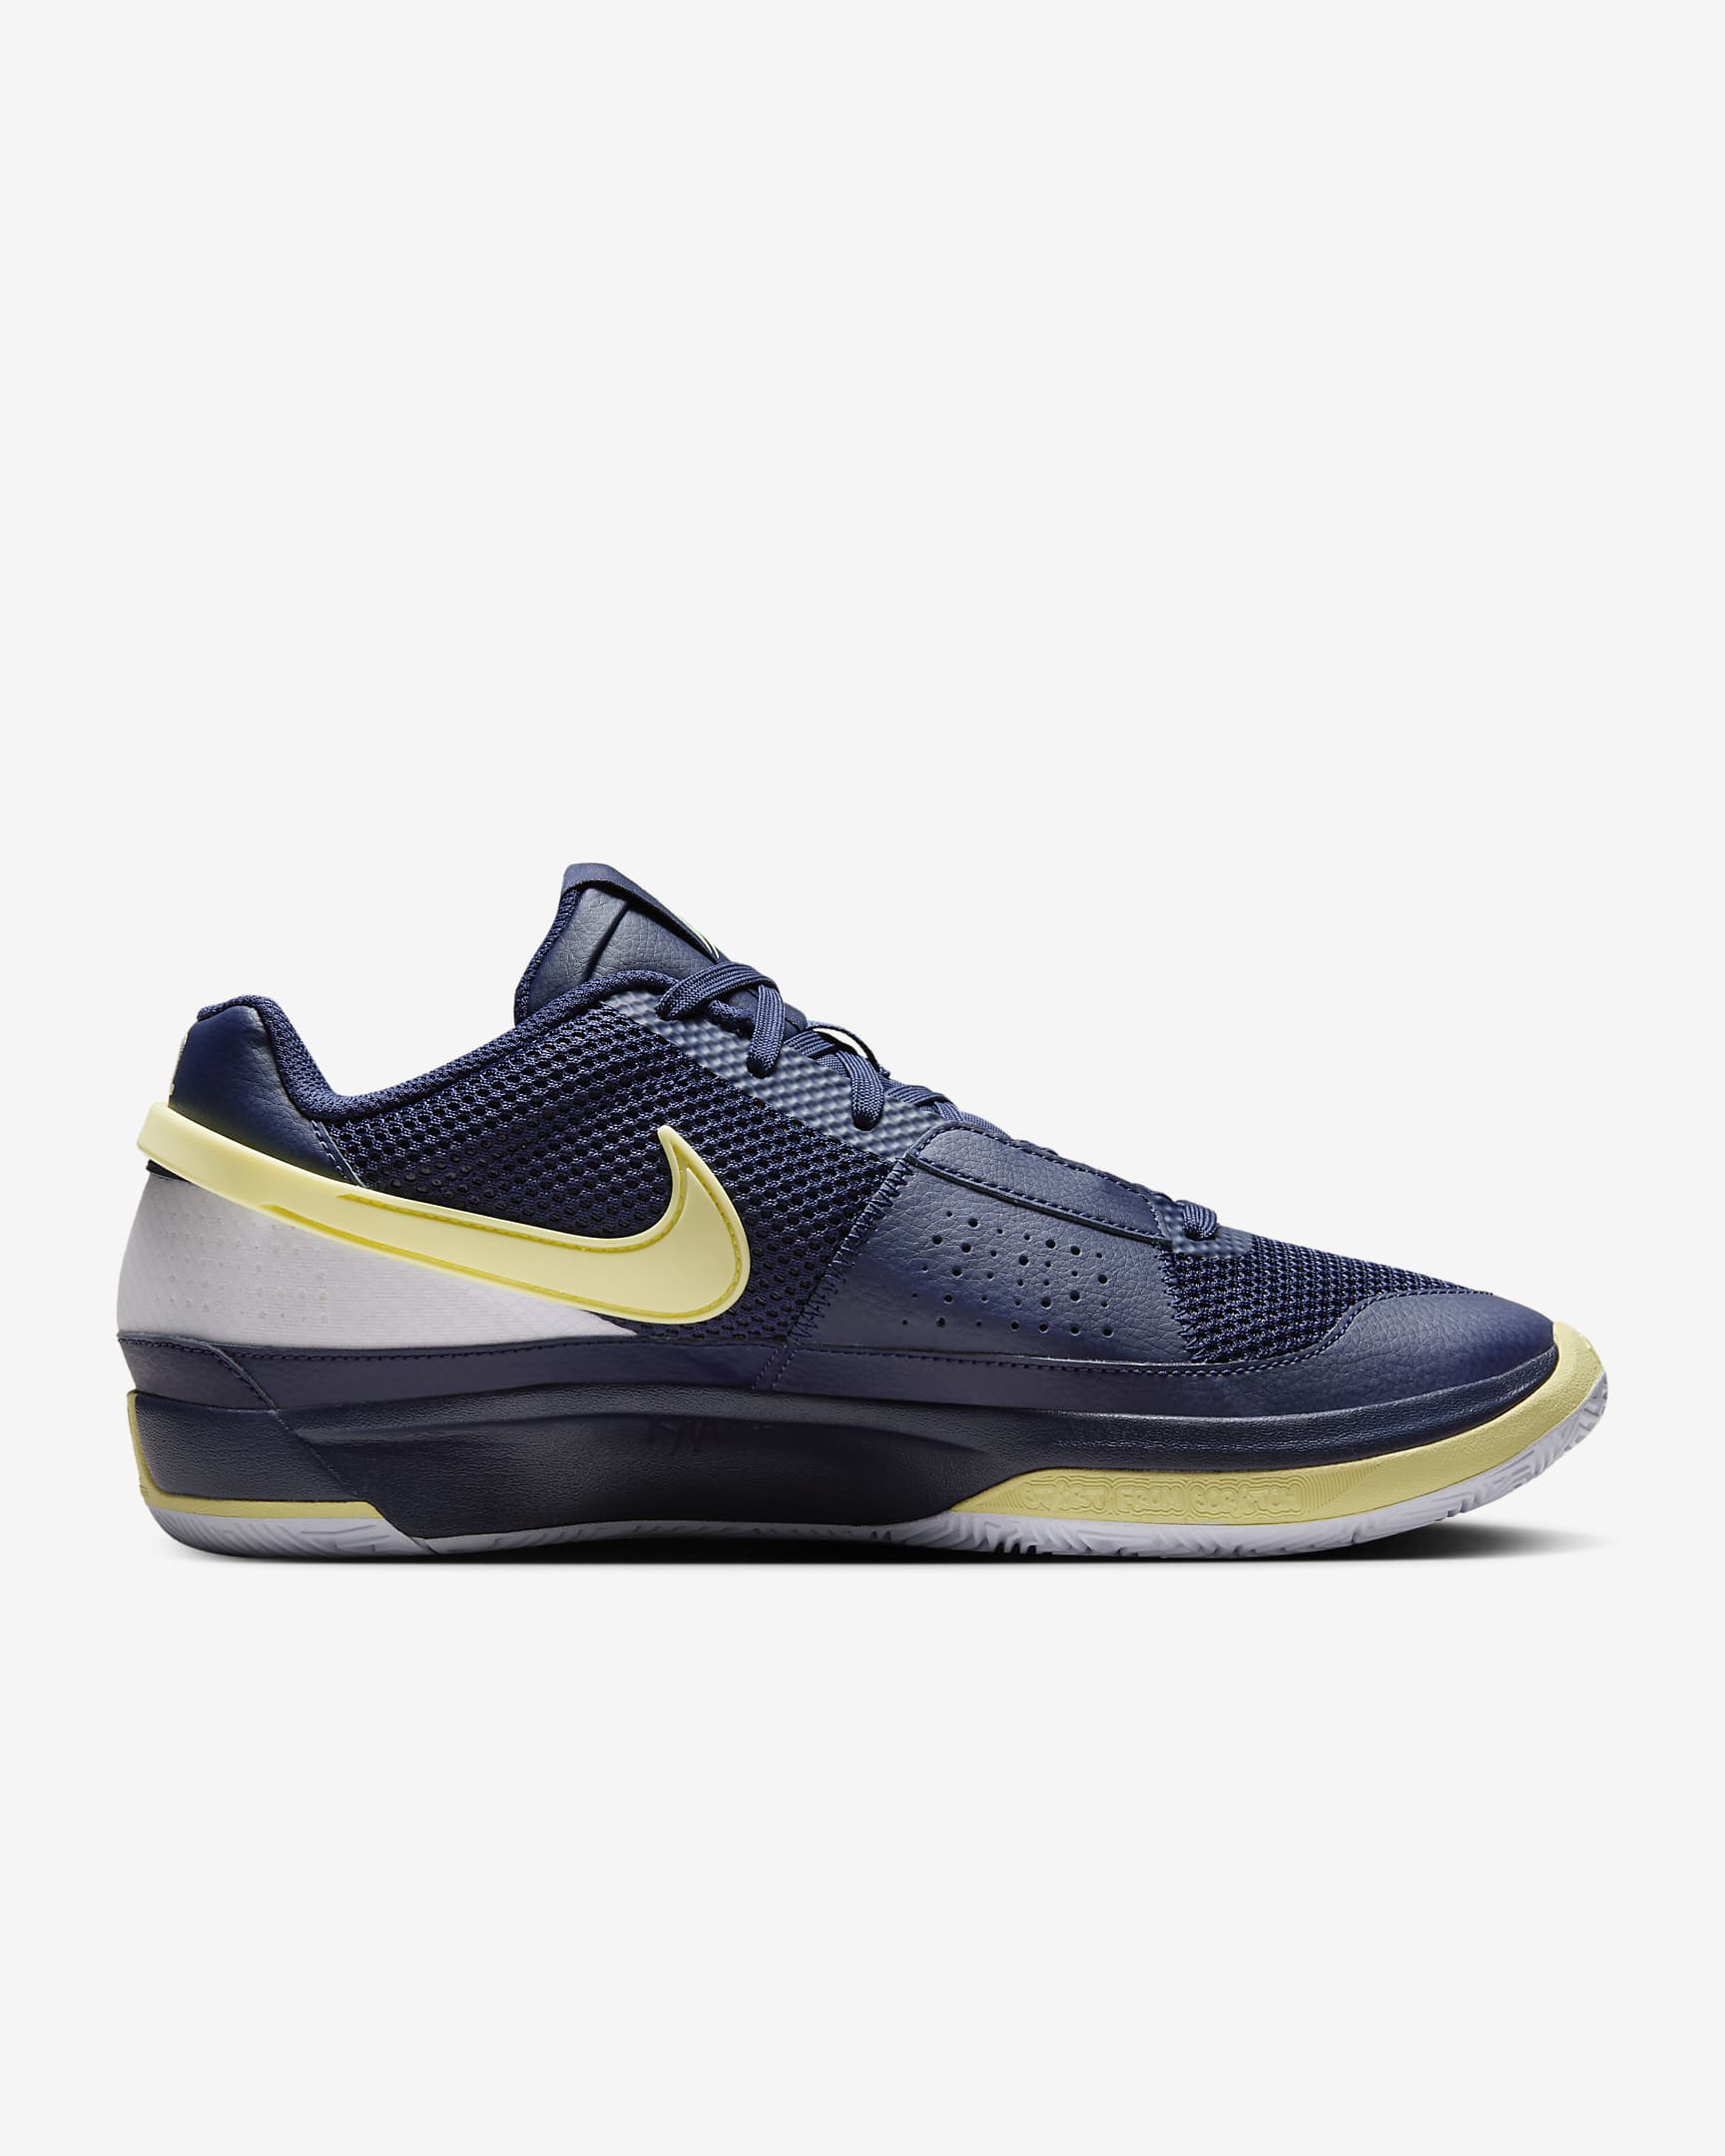 JA 1 EP Basketball Shoes. Nike IN